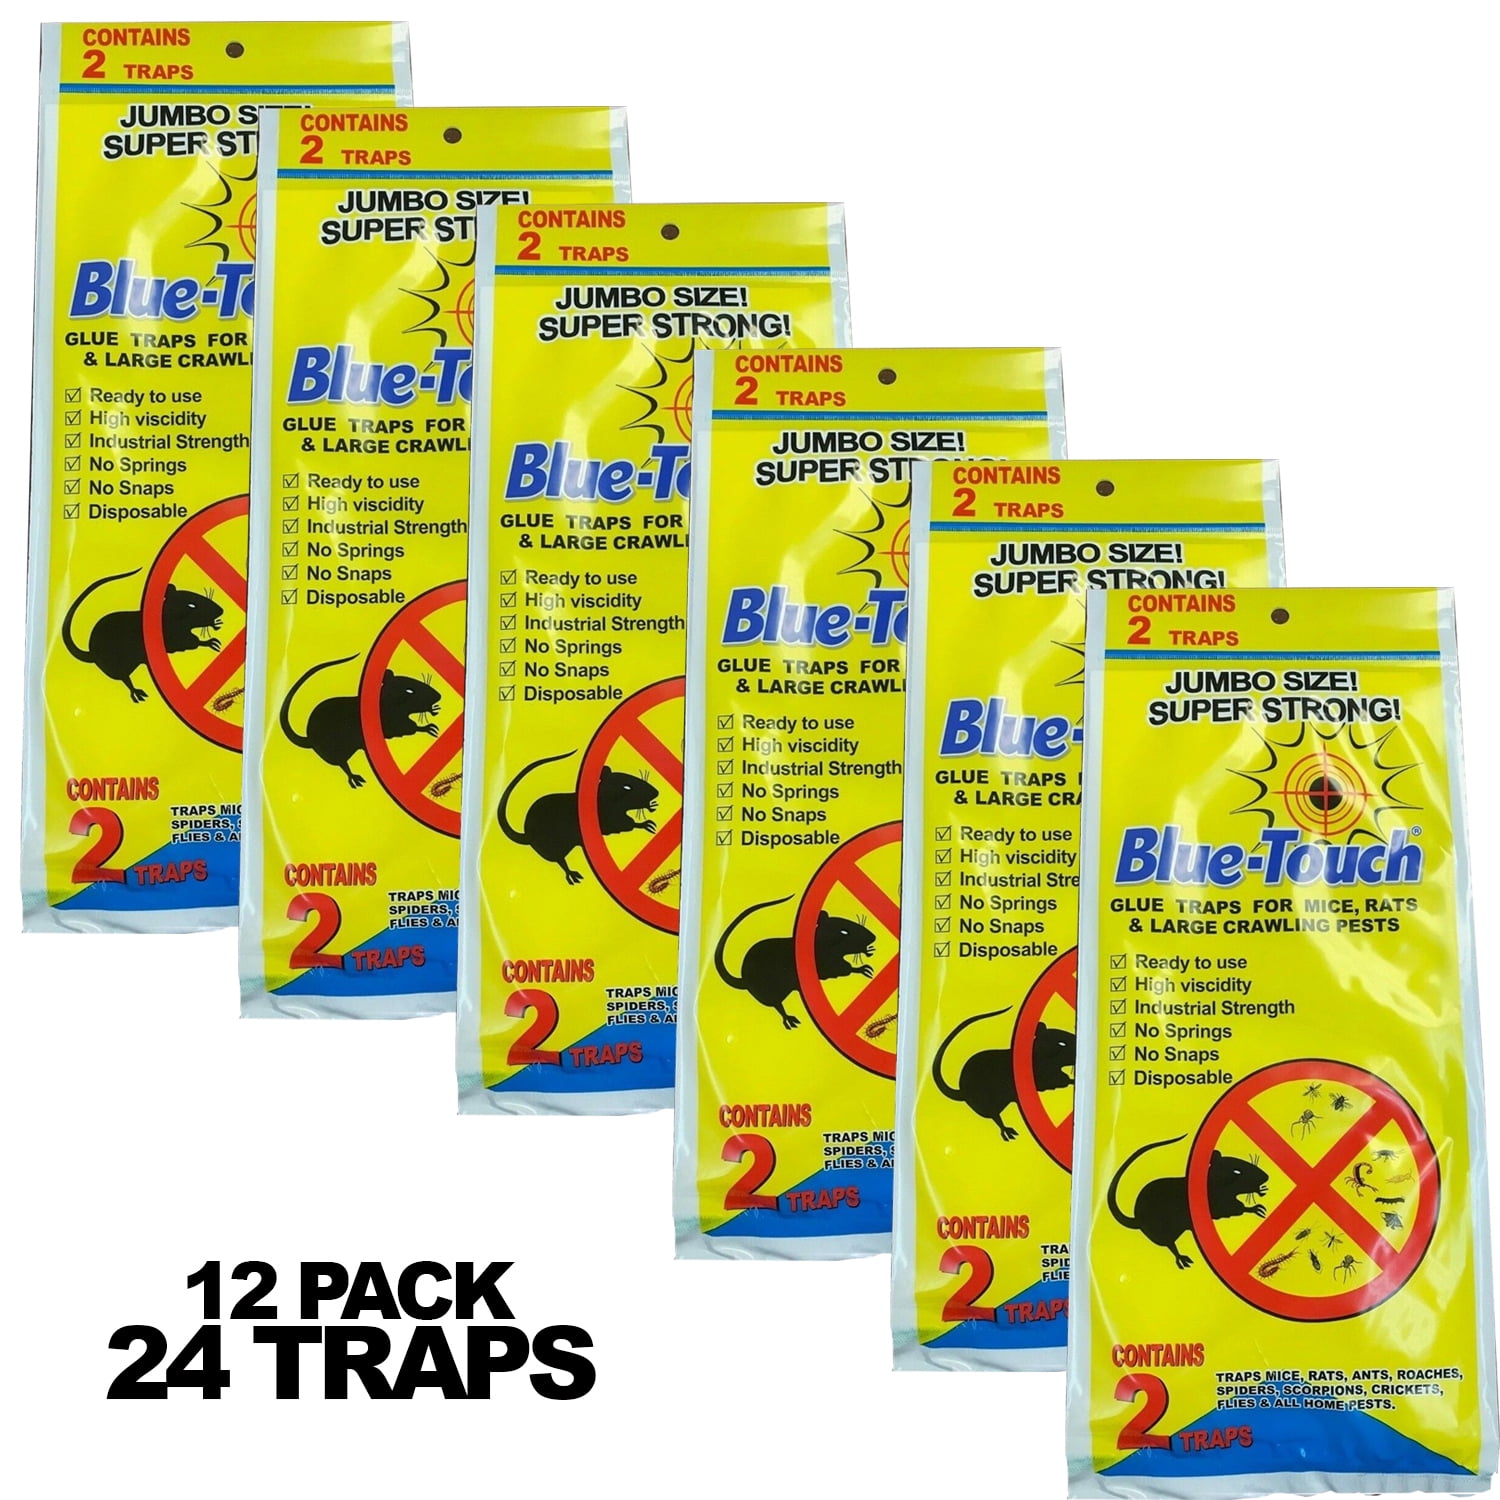 Mouse Guard 12 Pack Ready-to-Use Odorless Mouse Glue Traps for